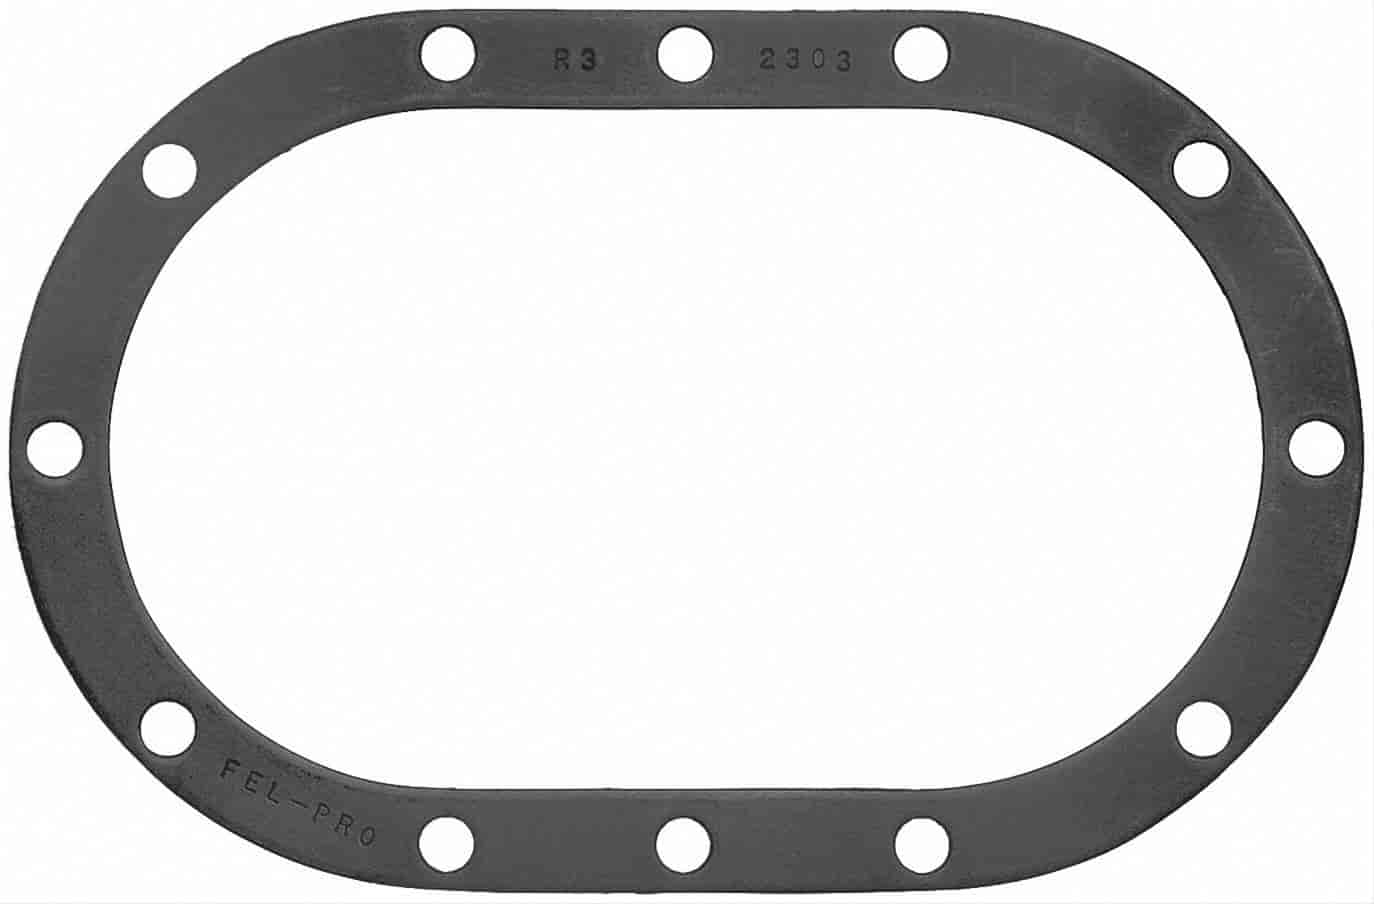 Quick Change Rear End Gasket 10-bolt cover, 1/32" thick